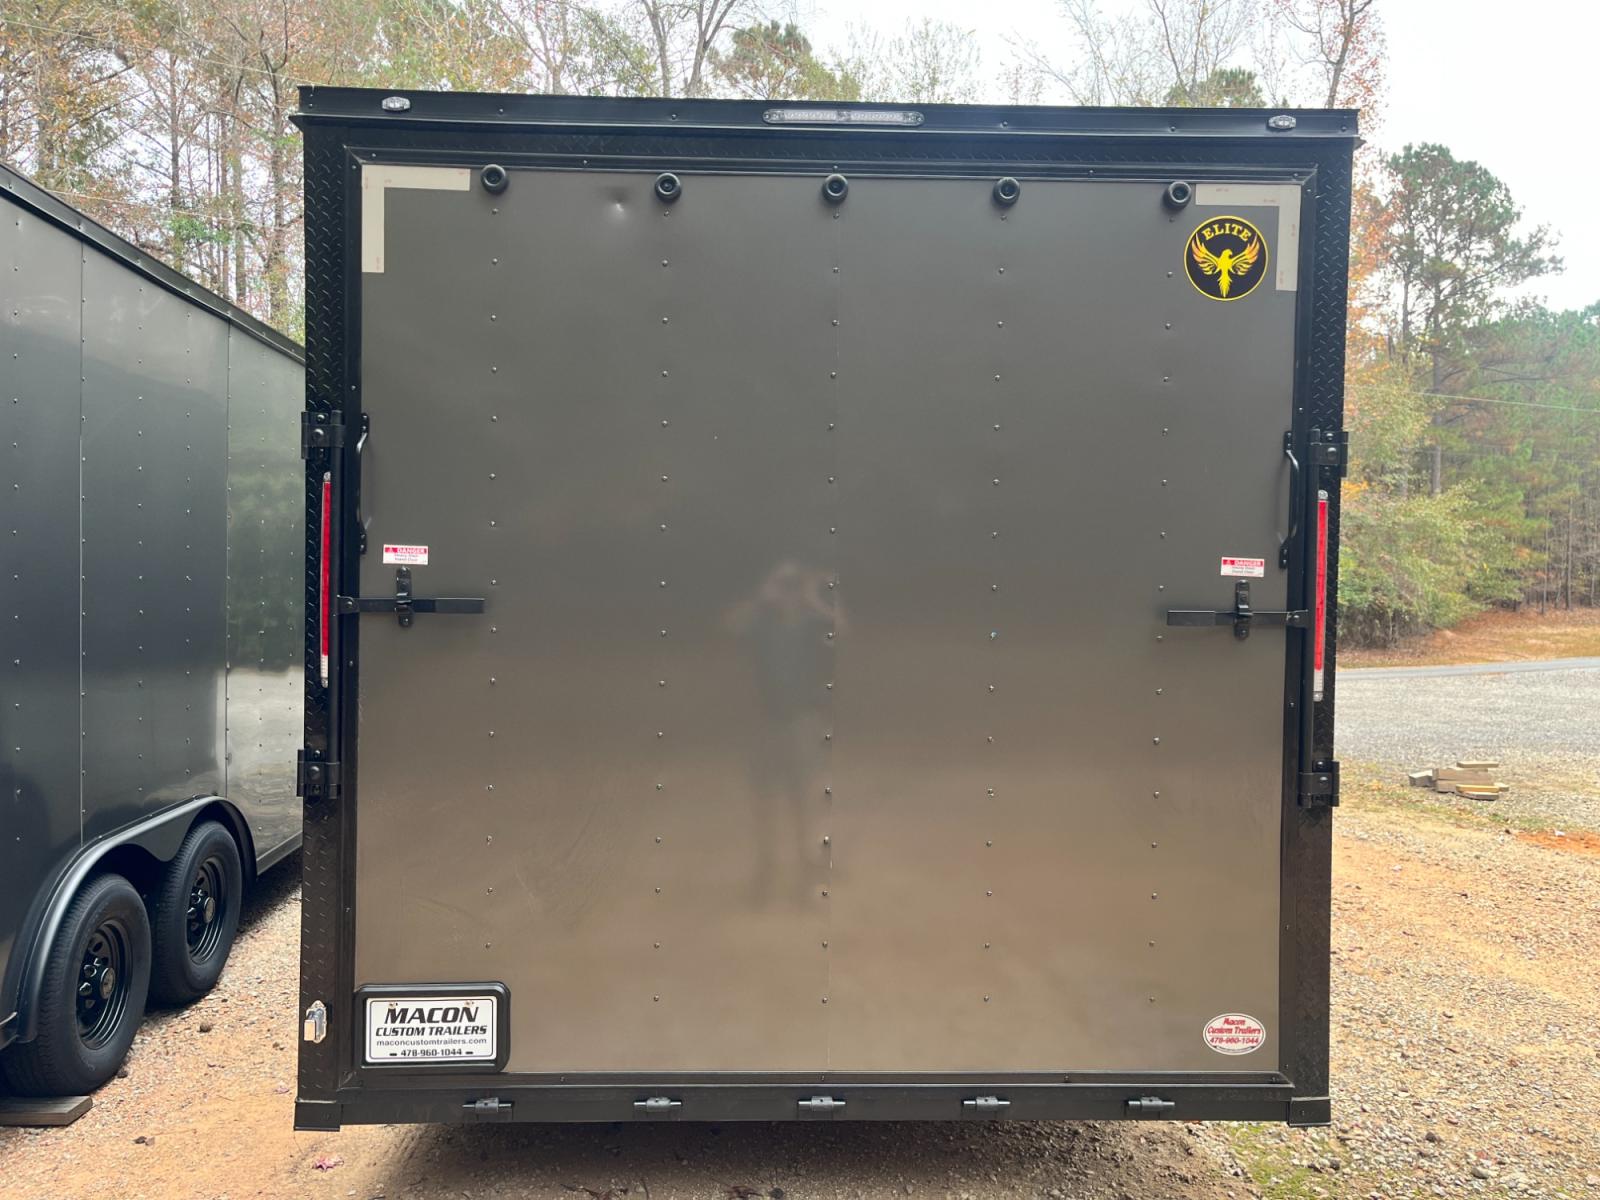 2023 .080 Charcoal Metallic w/Black Out Pkg. Elite Cargo 8.5ft X 20ft Tandem , located at 1330 Rainey Rd., Macon, 31220, (478) 960-1044, 32.845638, -83.778687 - 8.5ft X 20ft Tandem Enclosed Cargo Trailer! Made by Elite Trailers, in Tifton, Ga! This is the Best Quality Trailer Built Today! .080 Thick Charcoal Metallic Skin, with the Black Out Pkg Trim! One Piece Rubber Roof, on top of 7/16